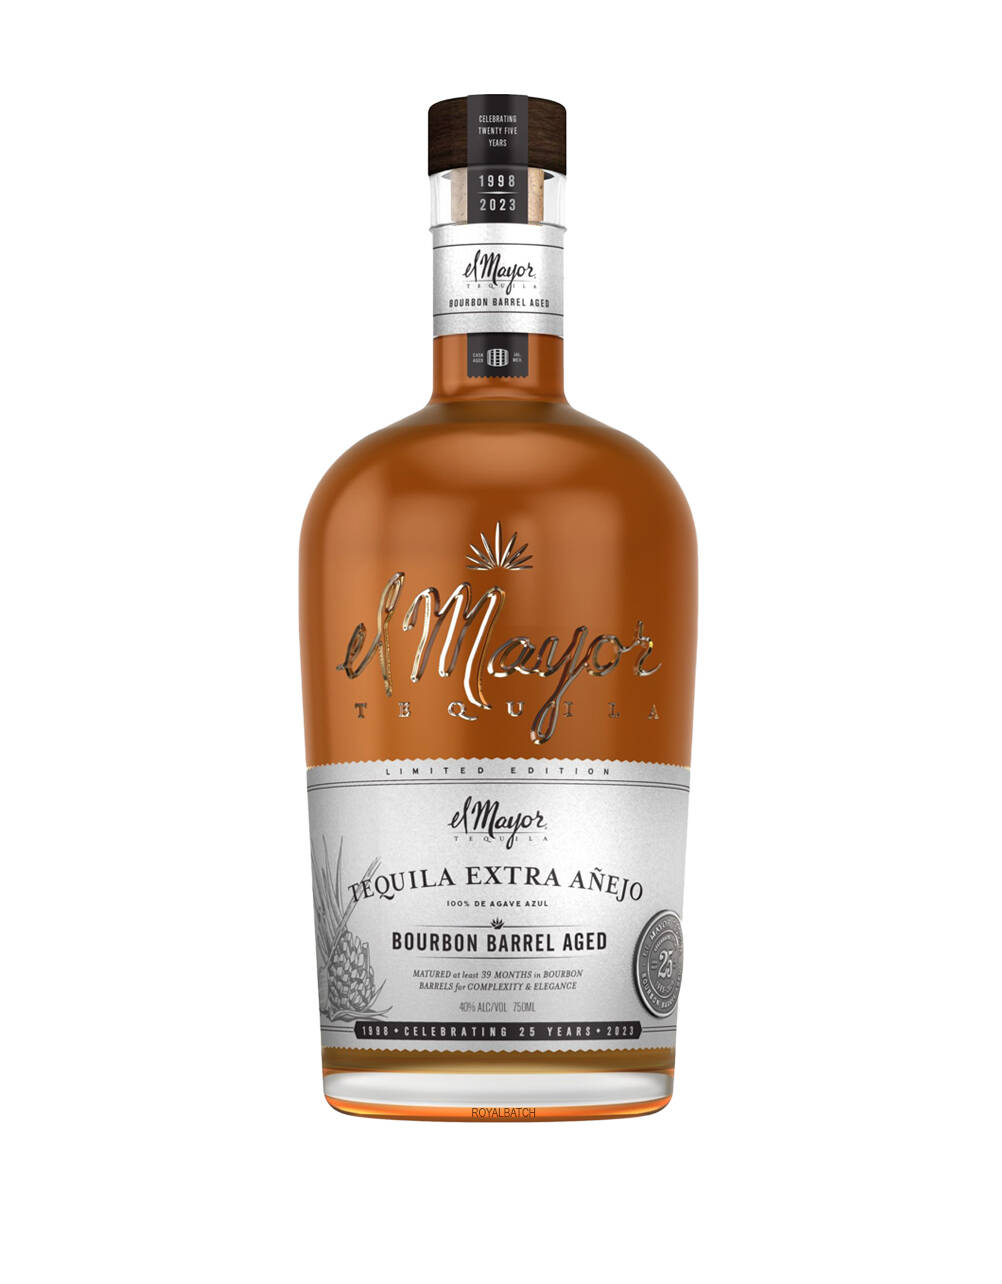 El Mayor Extra Anejo 25th Anniversary Limited Edition Tequila